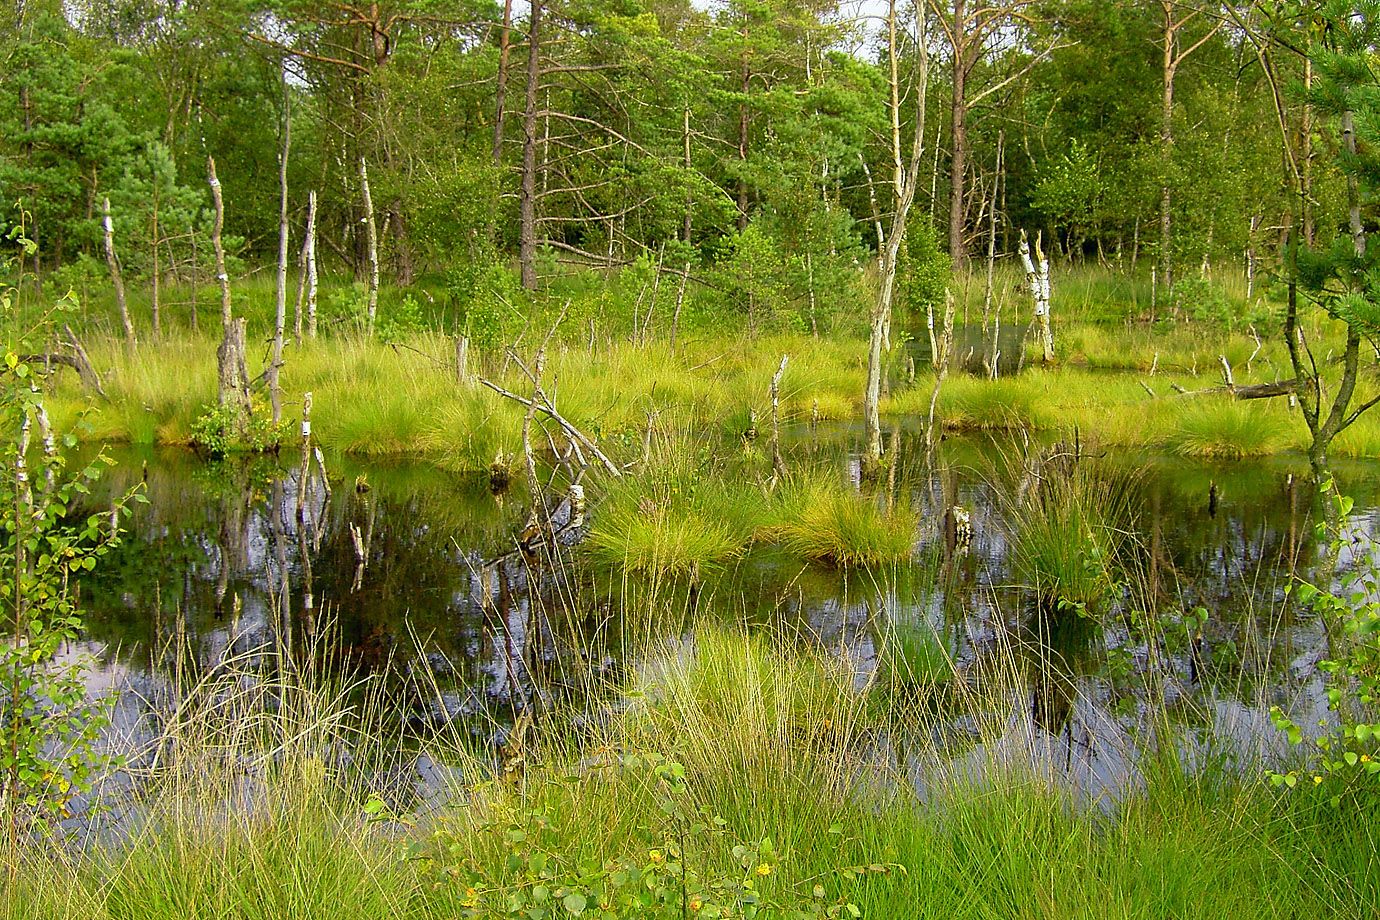 The Pietzmoor is the largest continuous marsh in the Lüneburg Heath